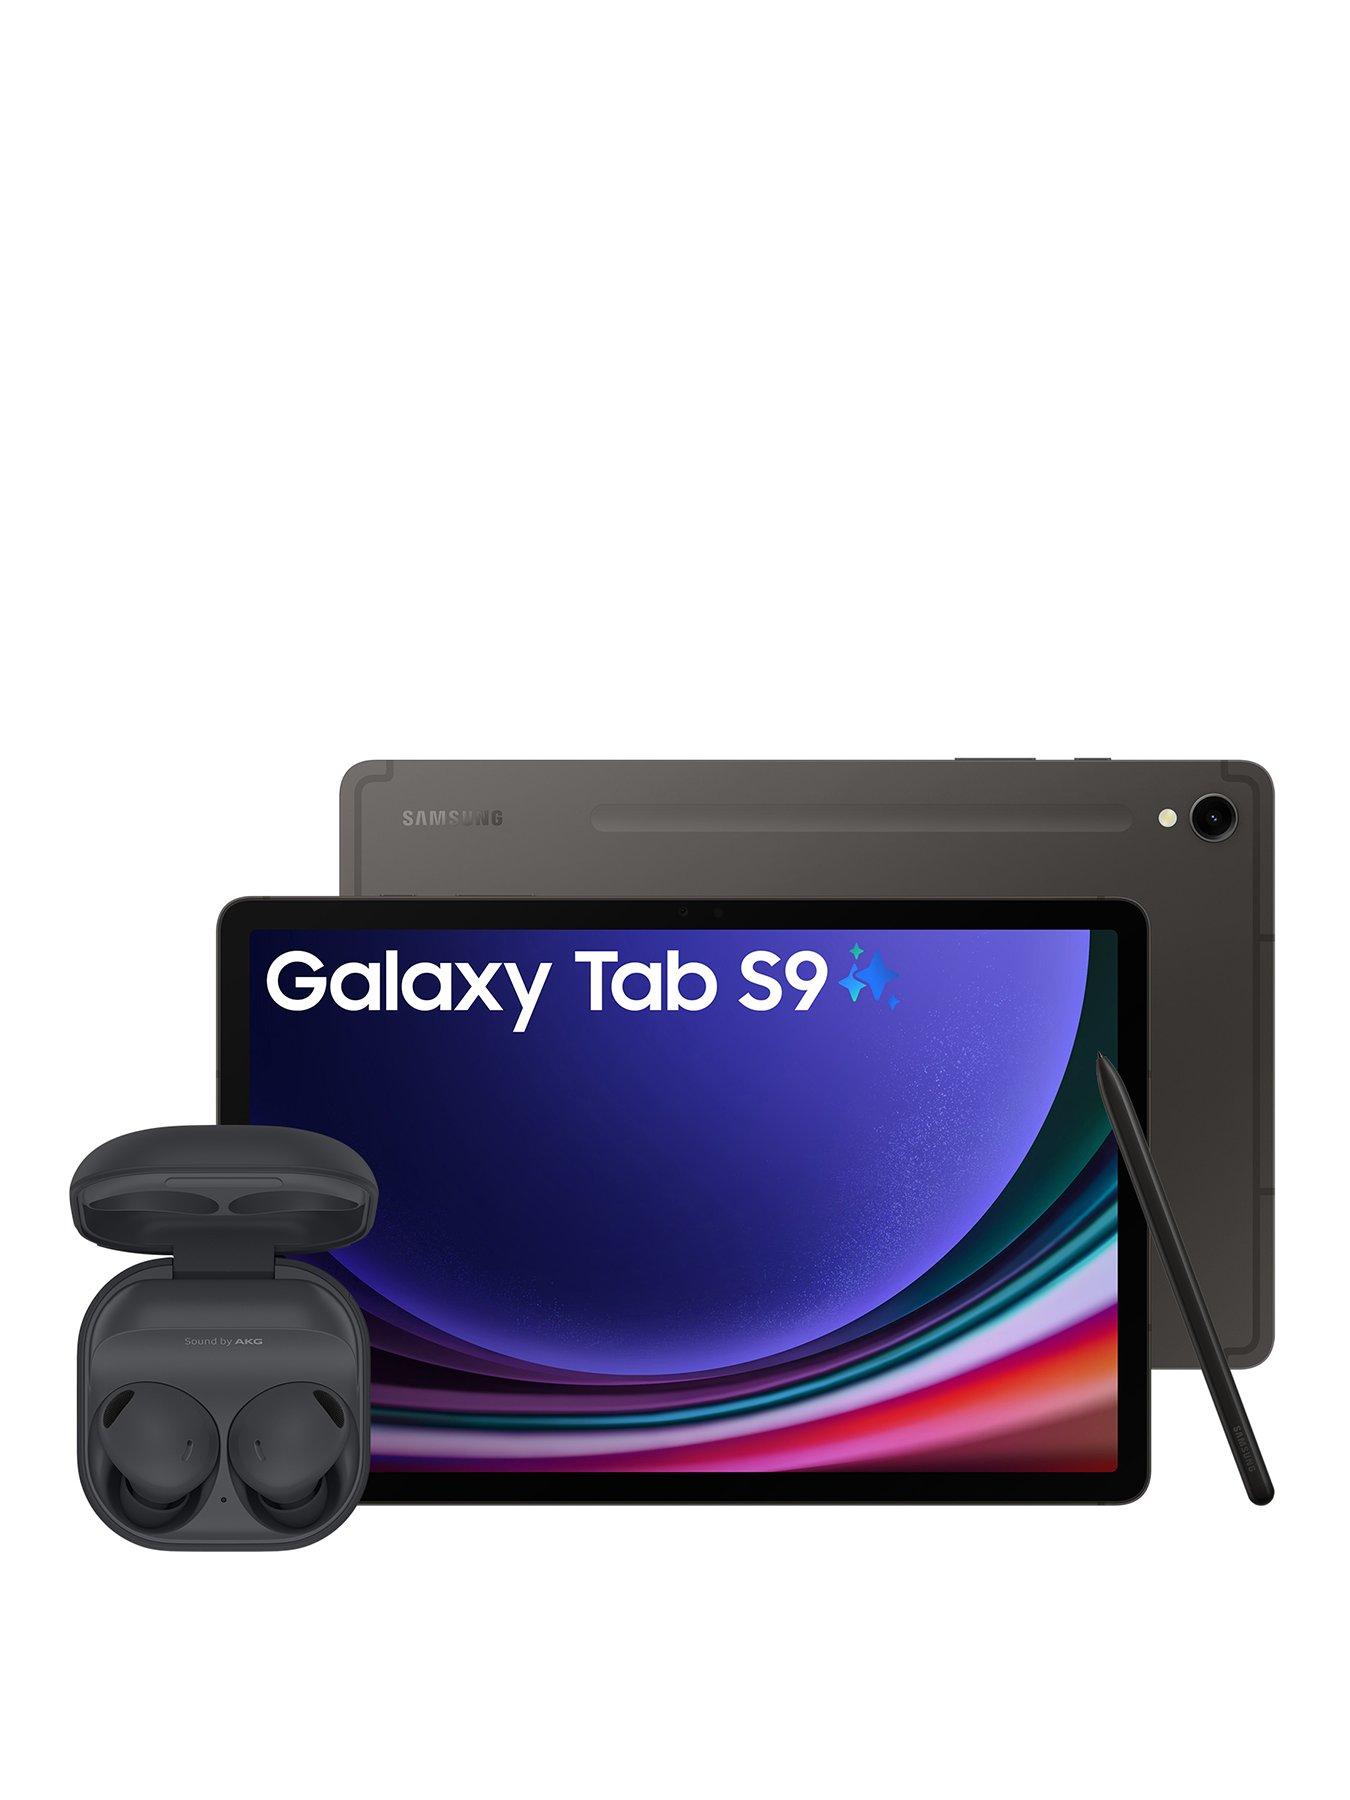 Samsung's Galaxy Tab S9 may get a feature the iPad has never had